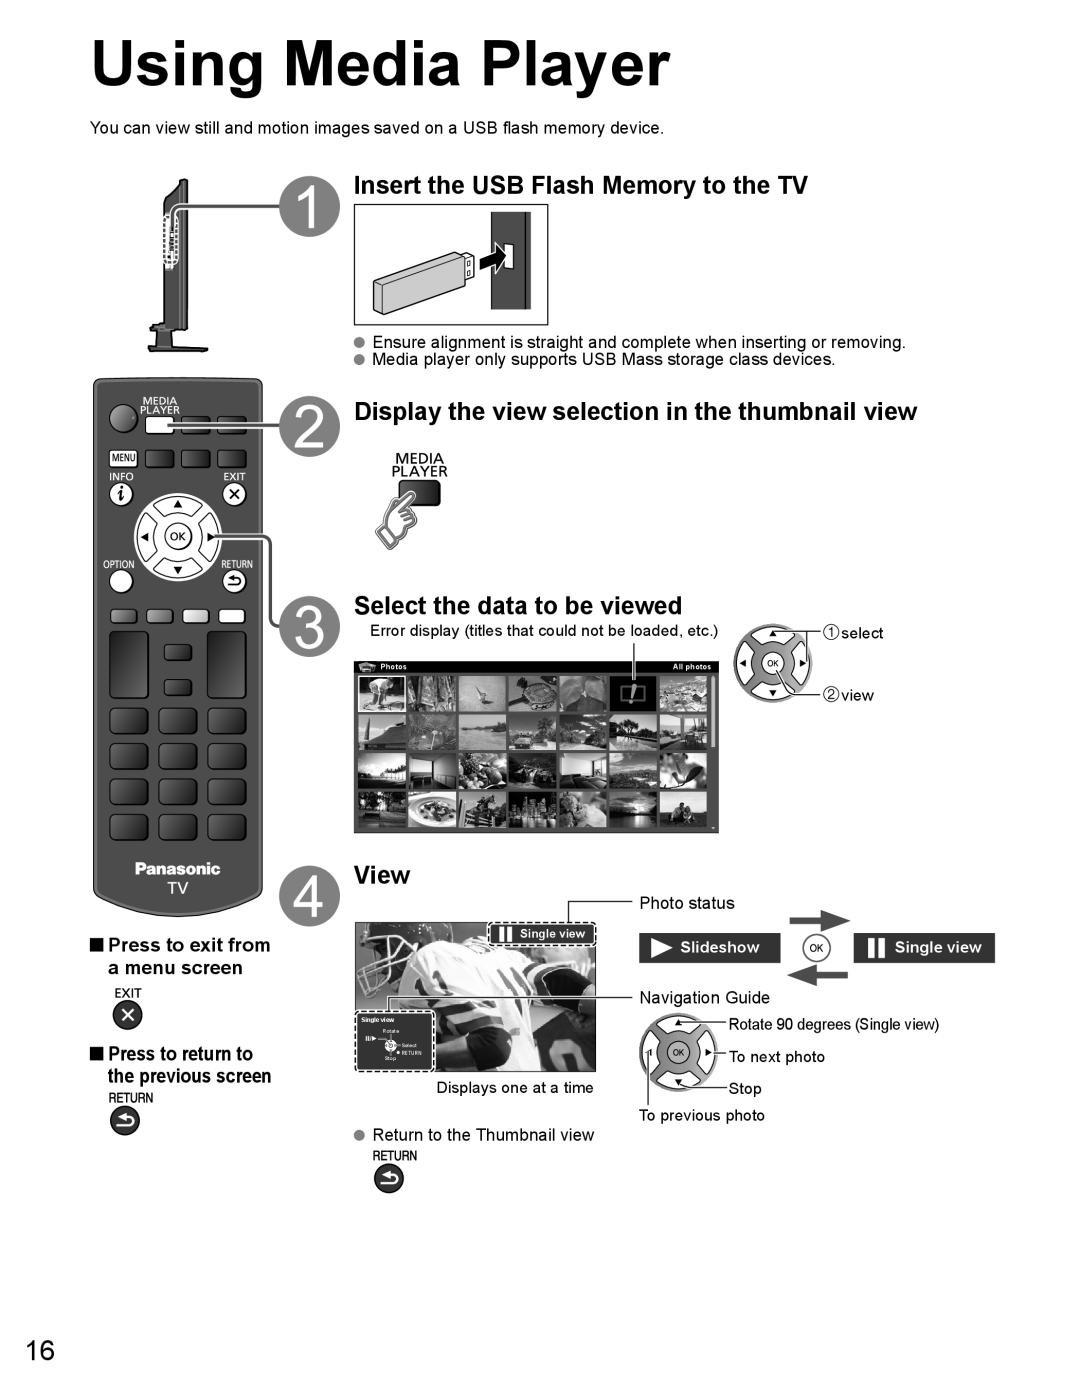 Panasonic TH50LRU60 warranty Using Media Player, Insert the USB Flash Memory to the TV, Select the data to be viewed, View 